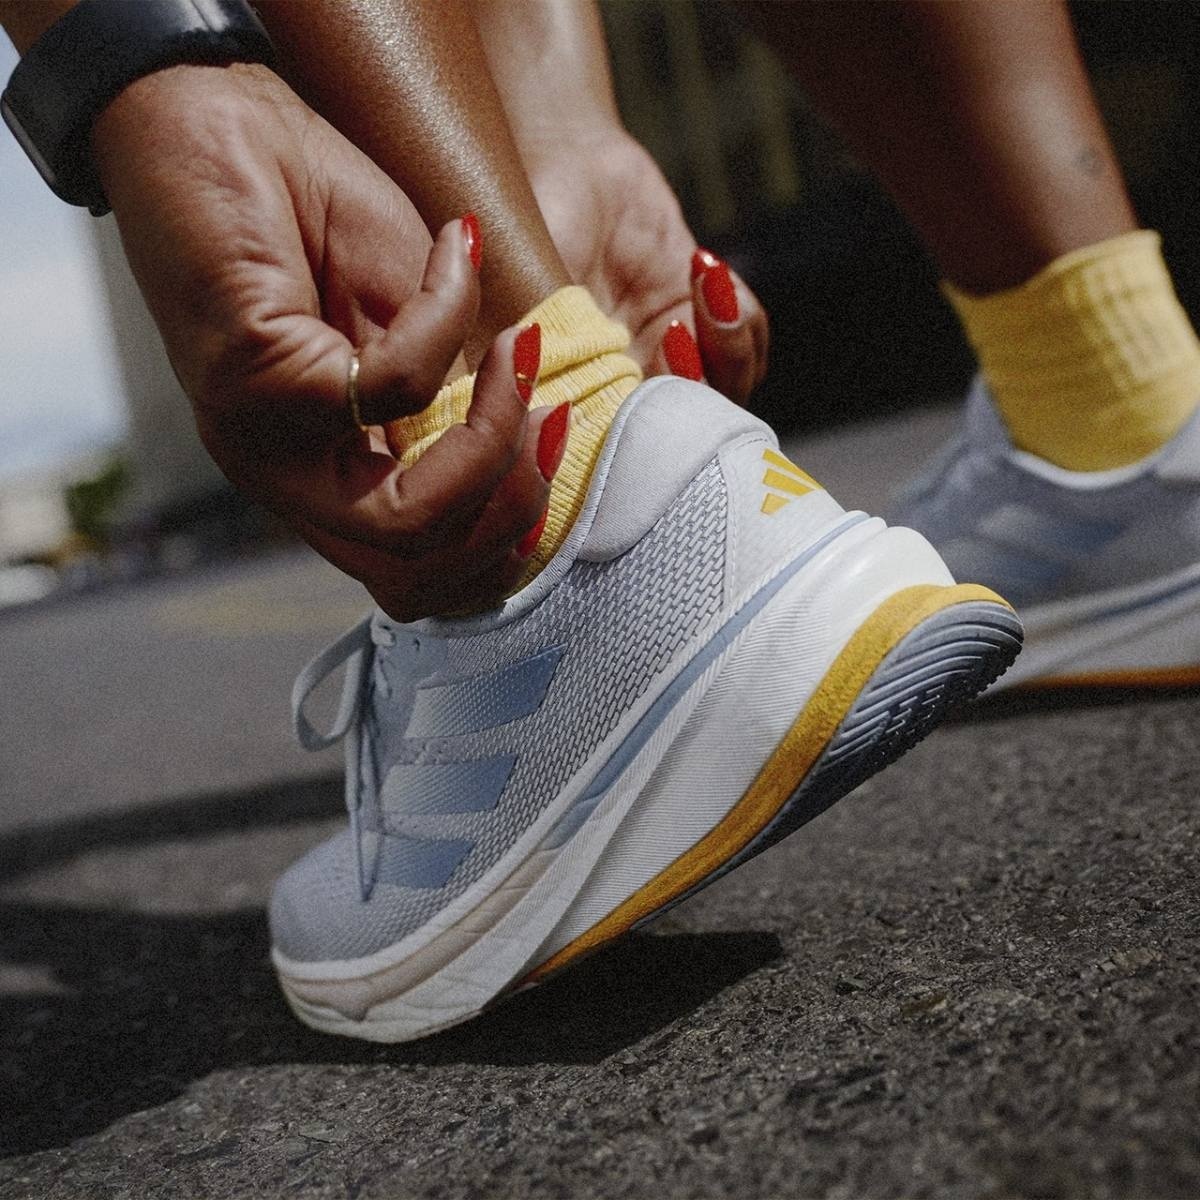 Here's the type of running shoe you need based on the type of runner you are